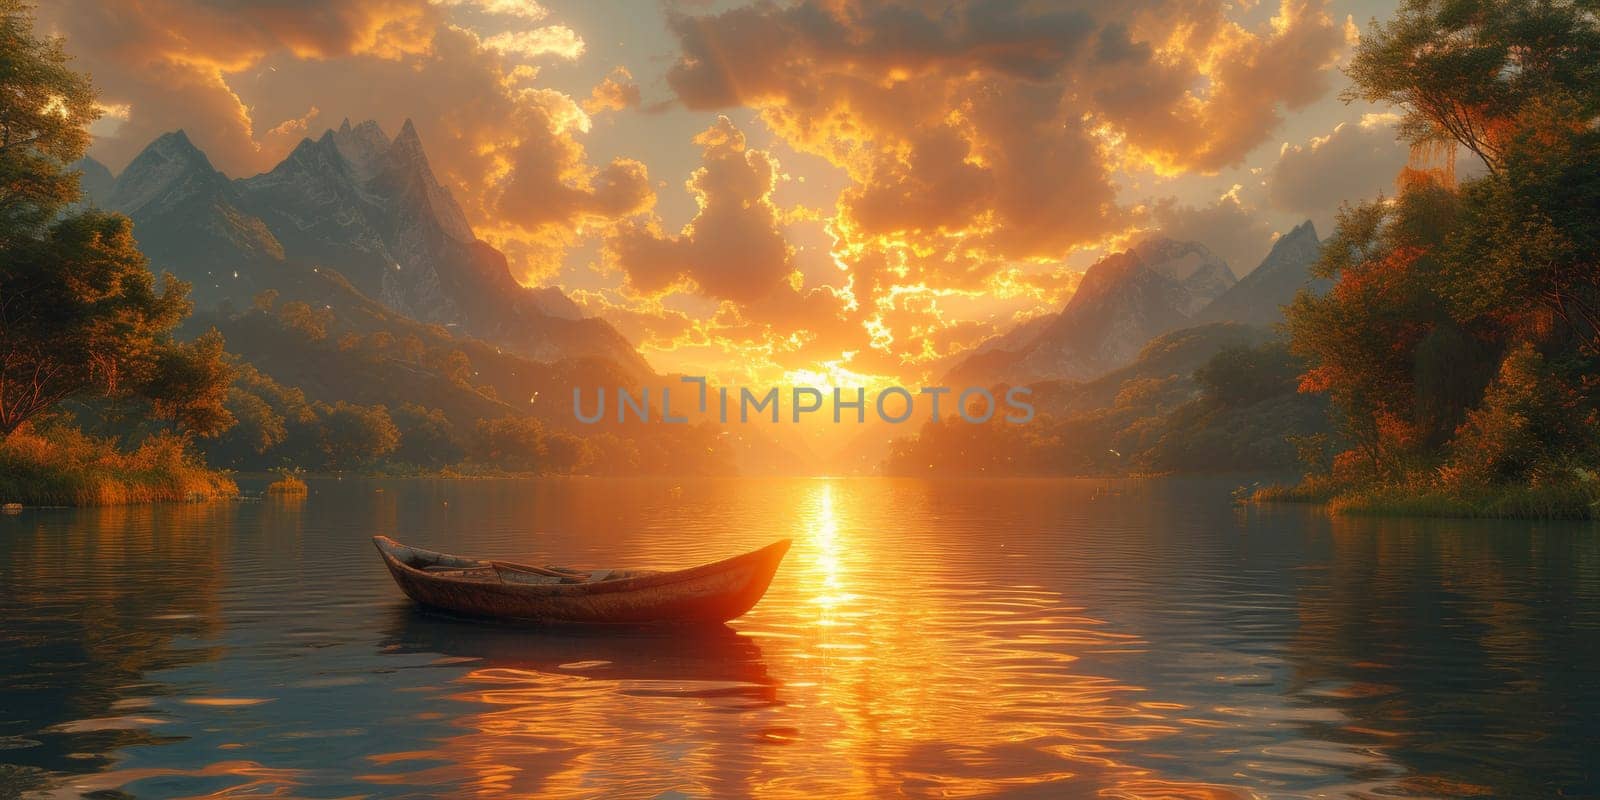 A boat on a lake at sunset with mountains in the background, AI by starush